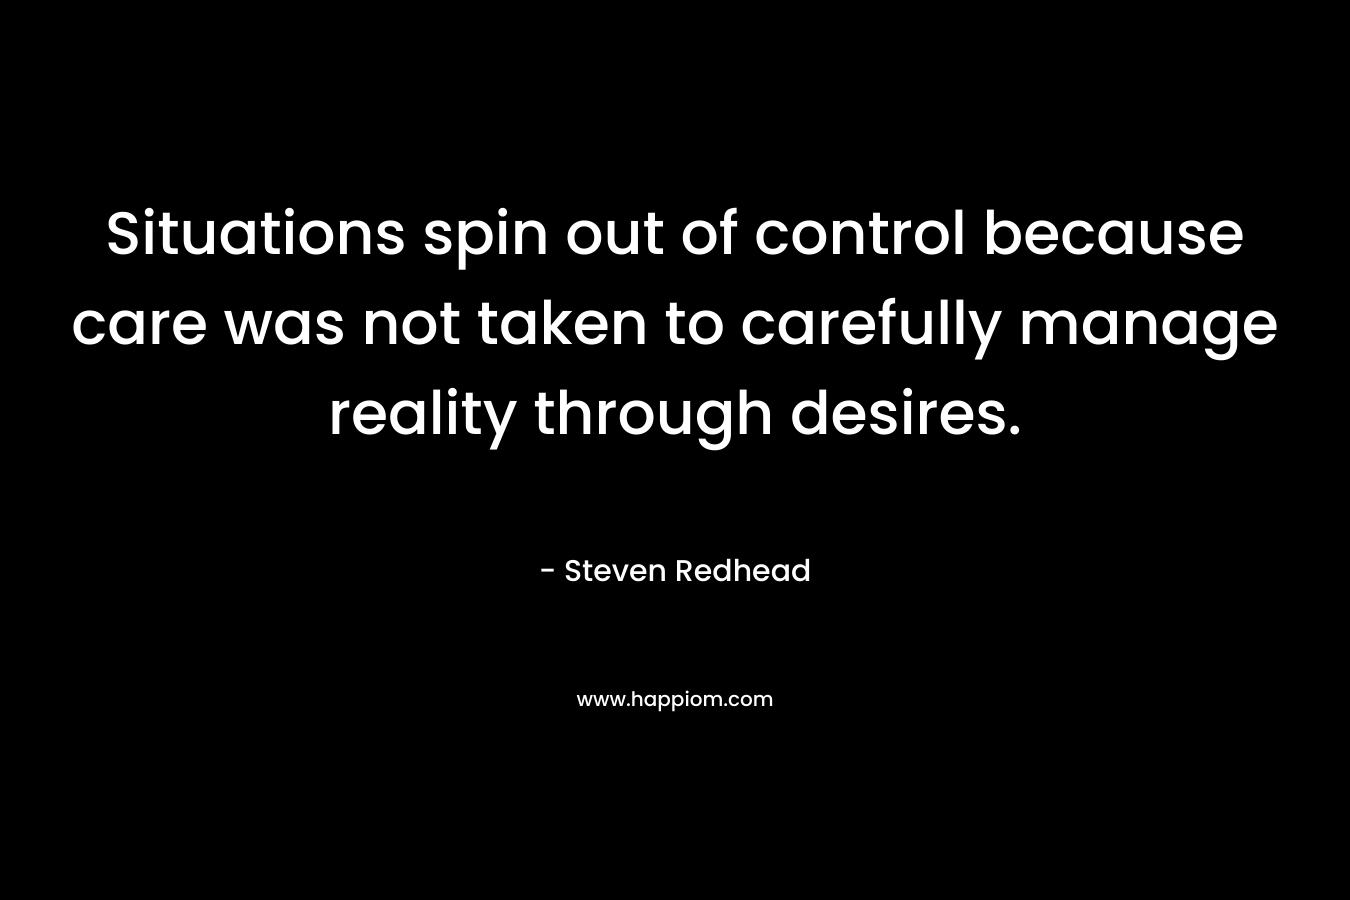 Situations spin out of control because care was not taken to carefully manage reality through desires. – Steven Redhead